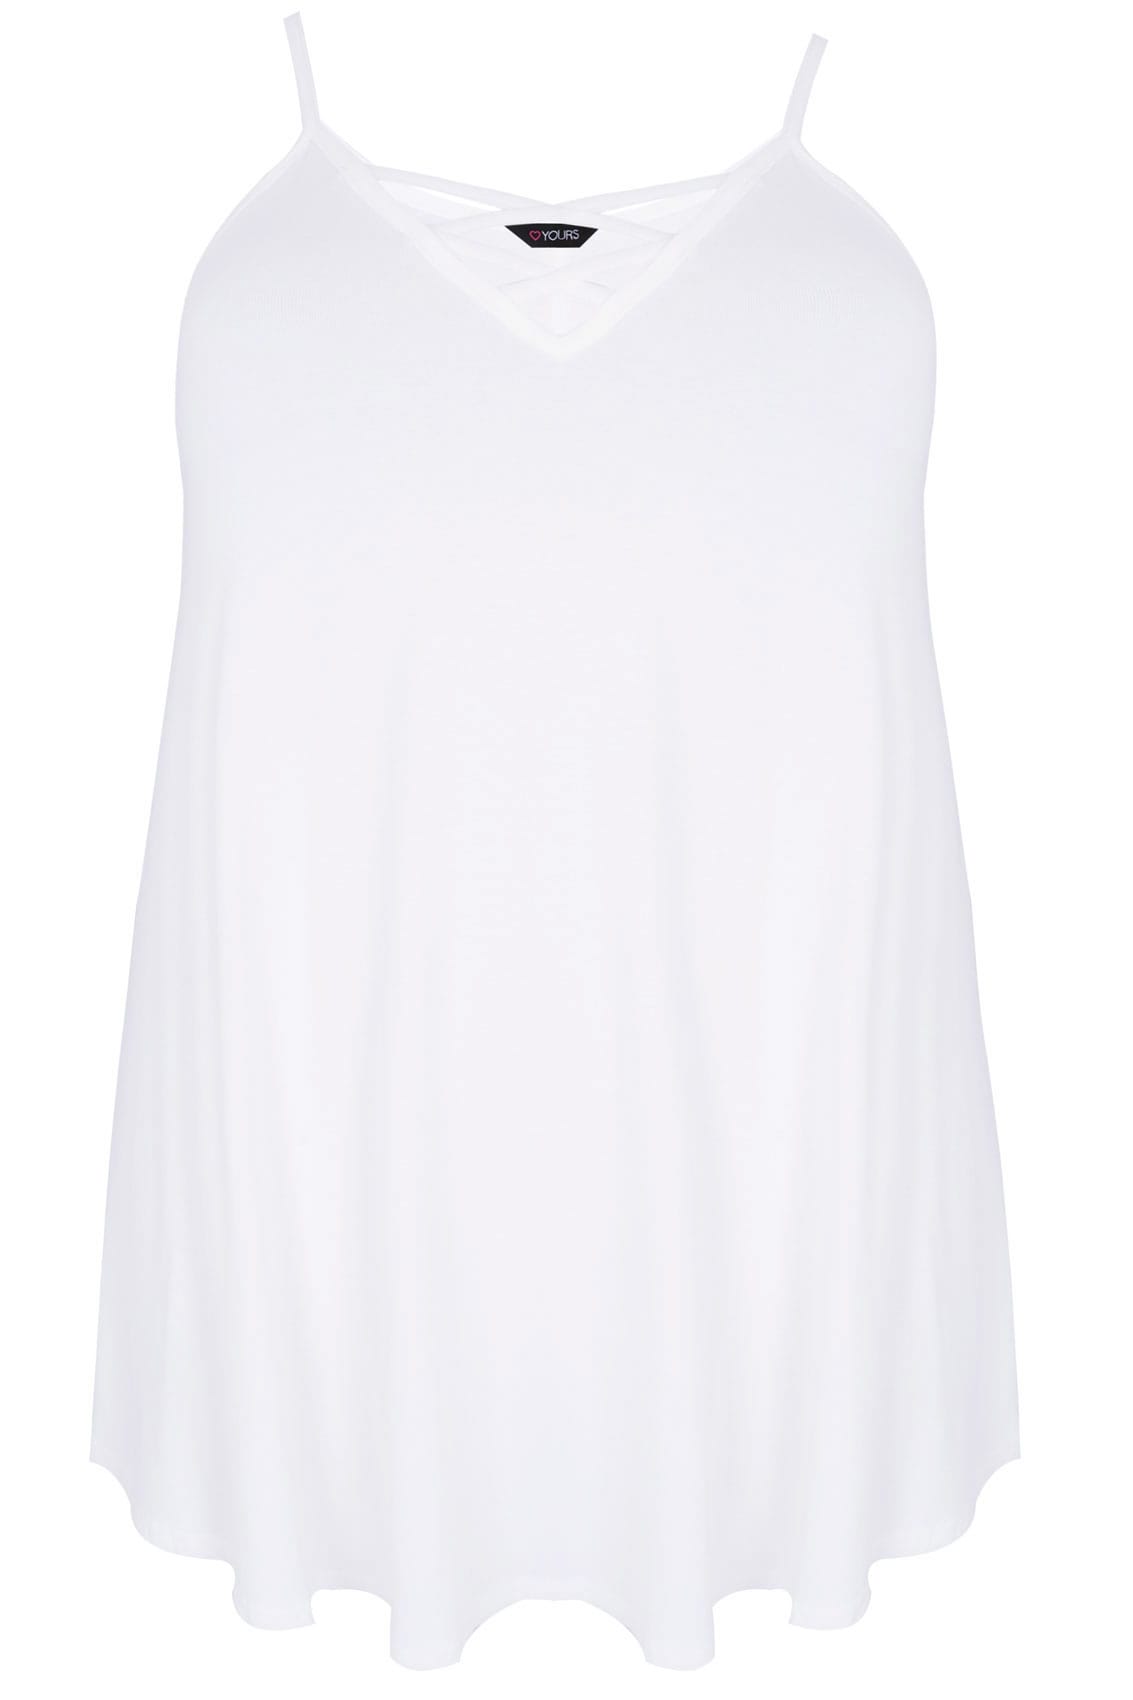 White V-Neck Longline Cami Vest Top With Cross Front Detail, Plus size ...